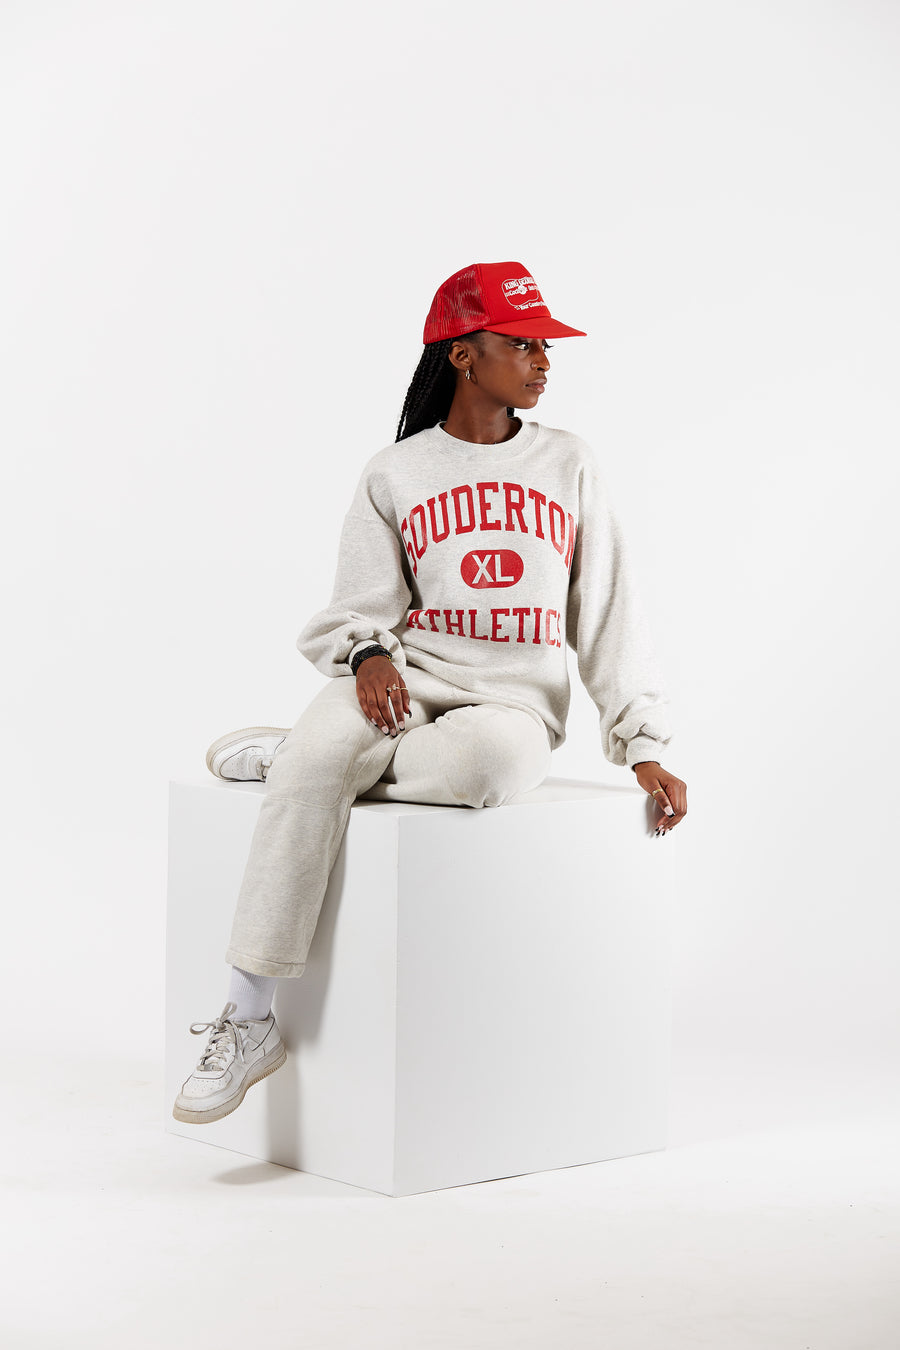 90s Souderton Athletics Sweatshirt in a vintage style from thrift store Twise Studio